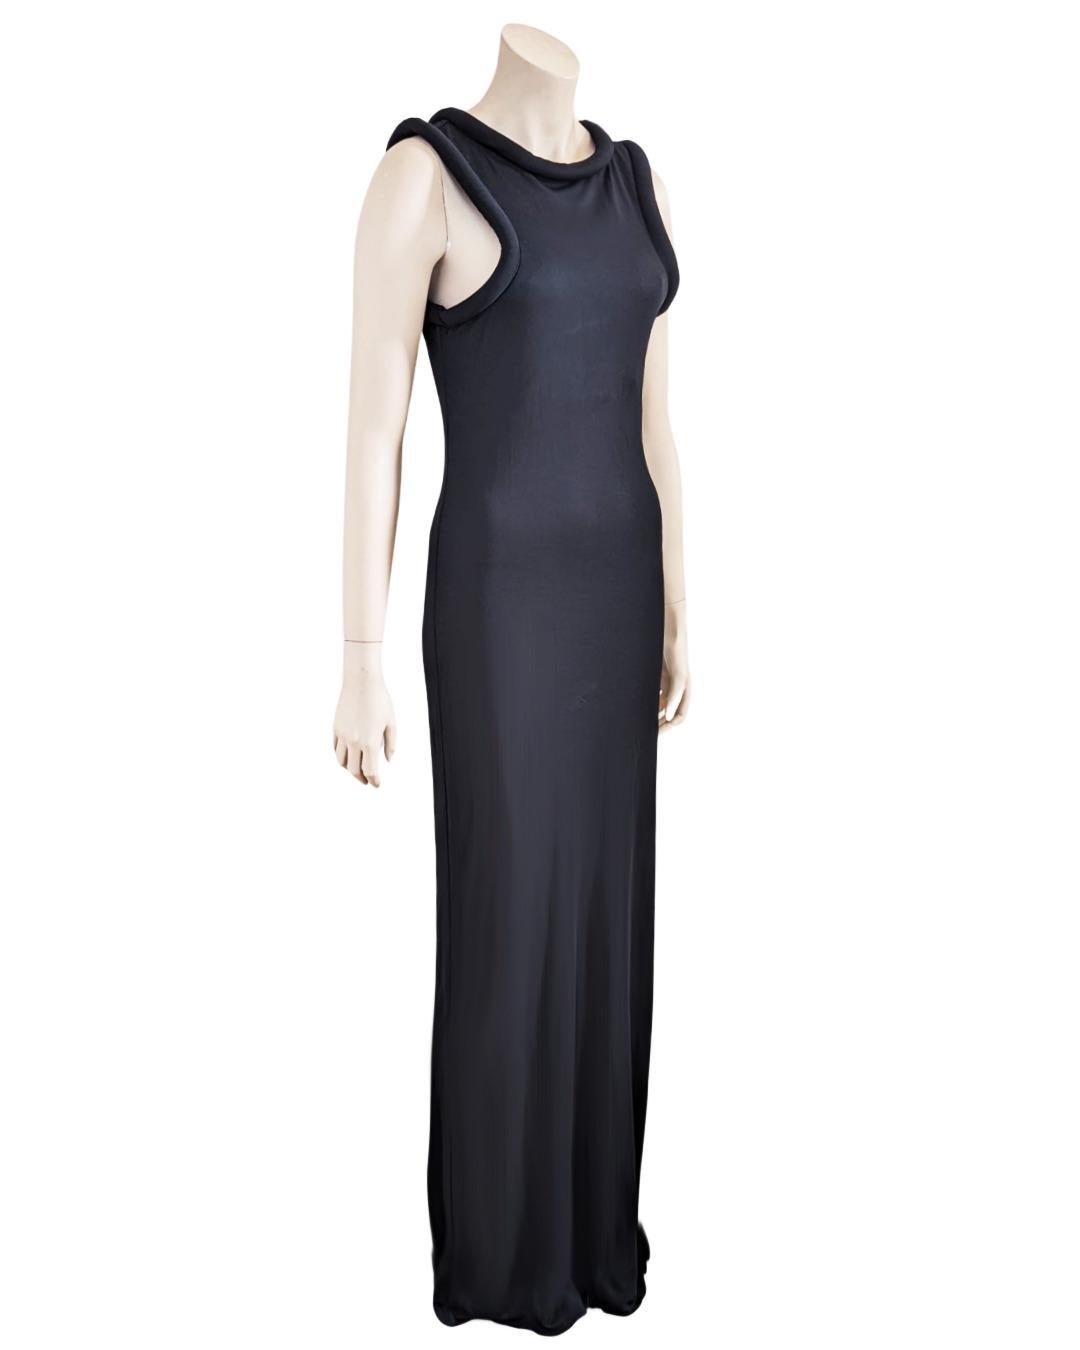 By Jean Paul Gaultier Deep Black Sleeveless Maxi Dress Cuff Collar 1995s.

· Oversize padded trim at collar and arms
· Tank Top
. No transparency
. Slip on
 

Size Fits M L

Measurements :
Breast 48cm
Waist 47cm
Length 147 cm 
 
Colors :